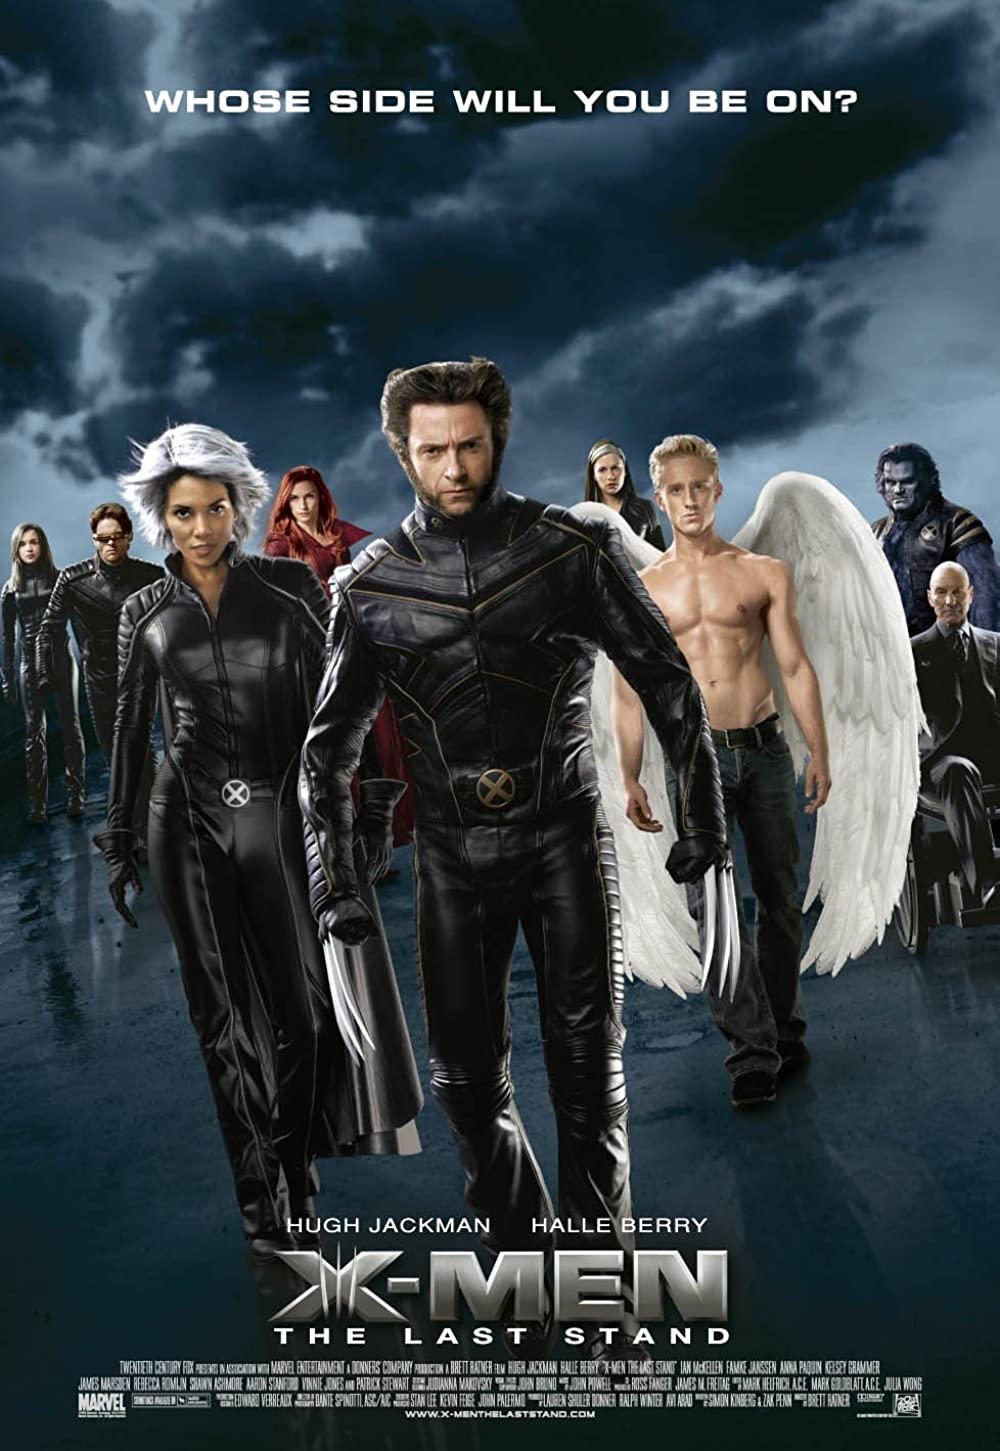 FULL MOVIE: X-Men: The Last Stand (2006) [Action]